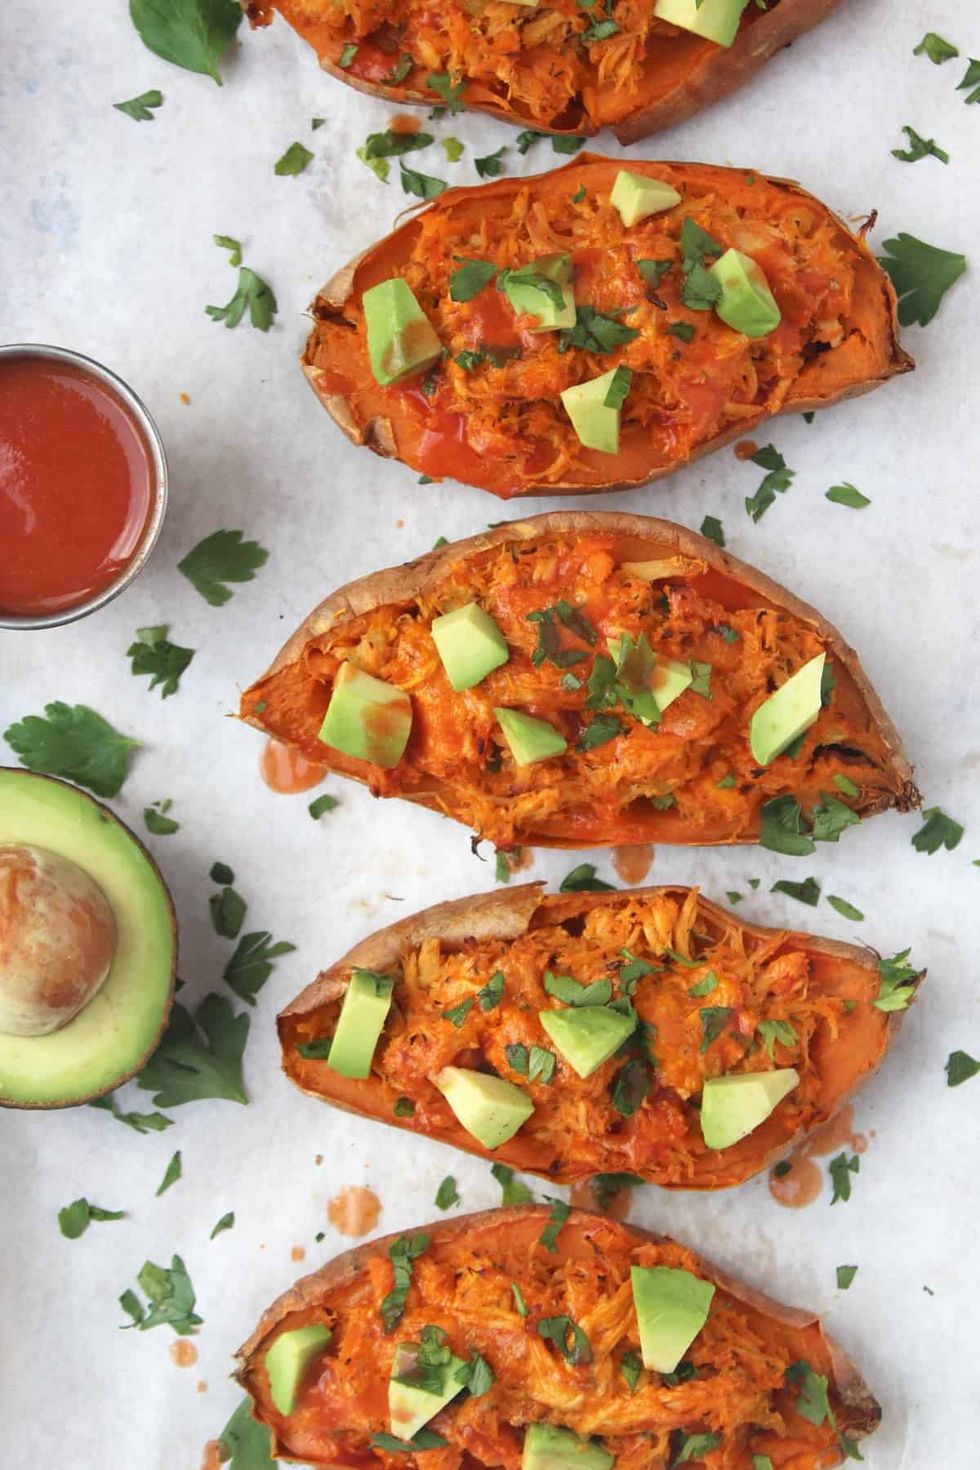 The 25 Best Whole30 Snacks to Eat While You're on the Diet